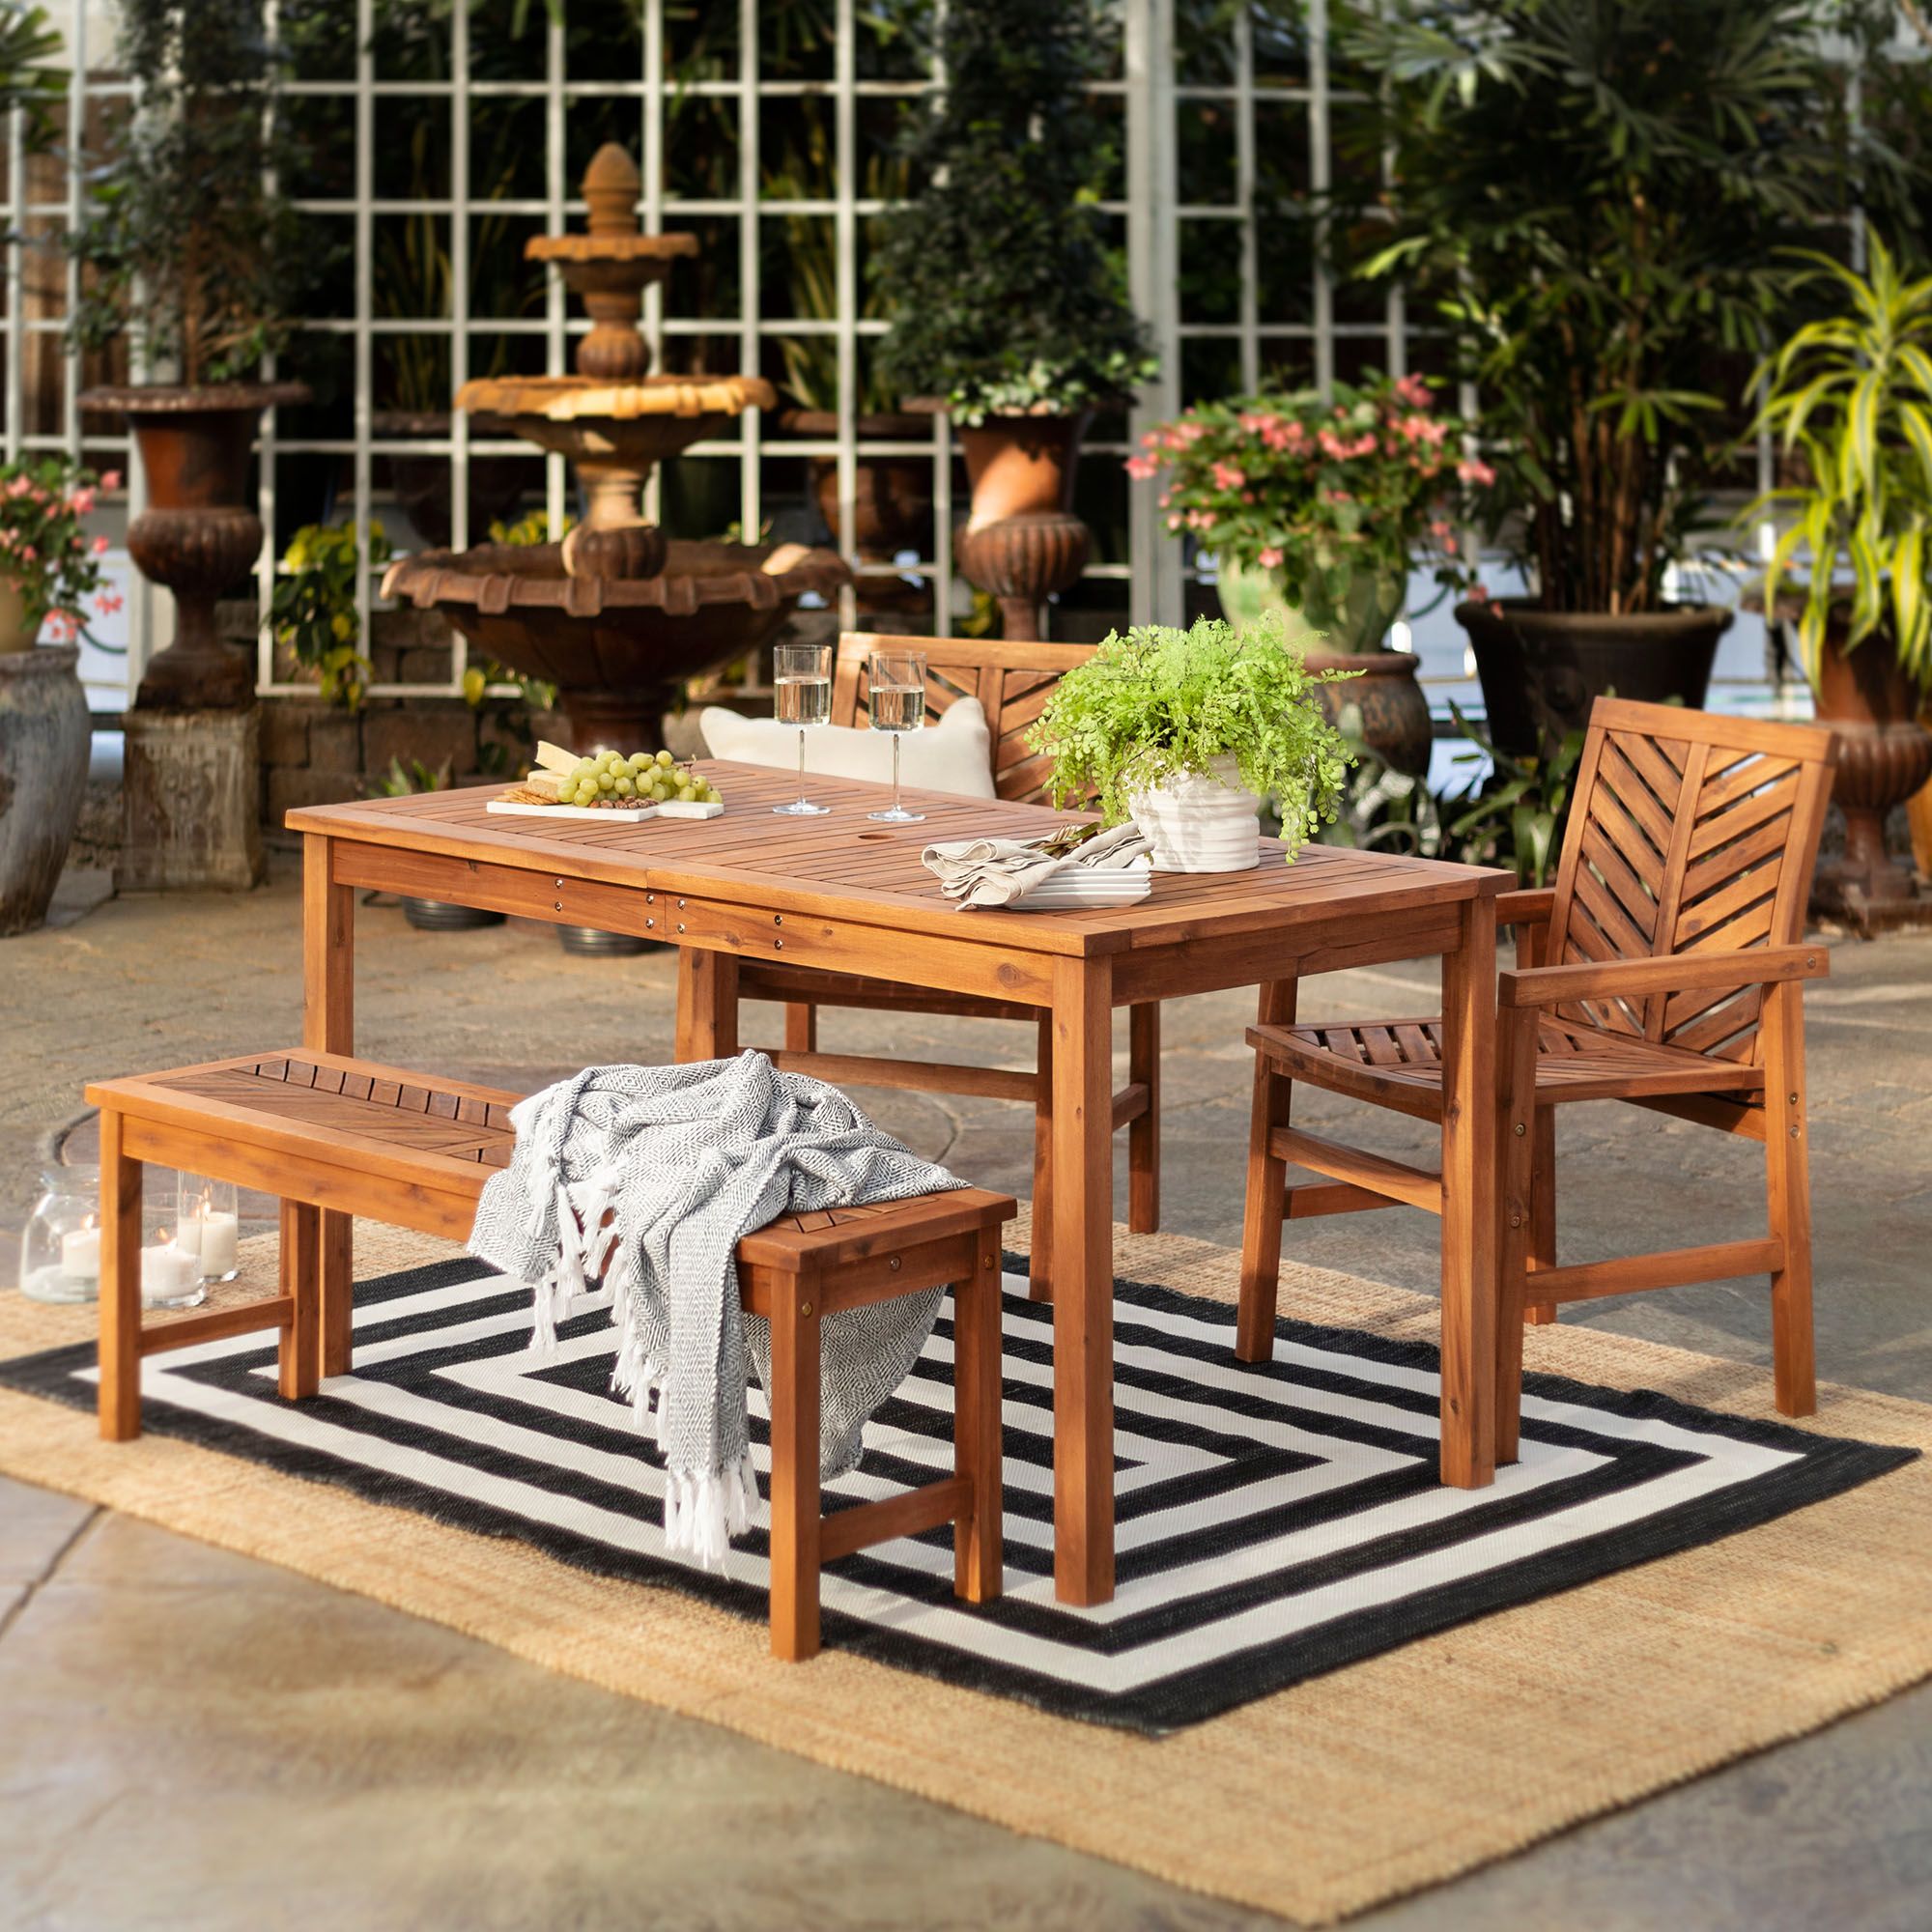 W. Trends 4-Pc. Patio Acacia Dining Set - Brown